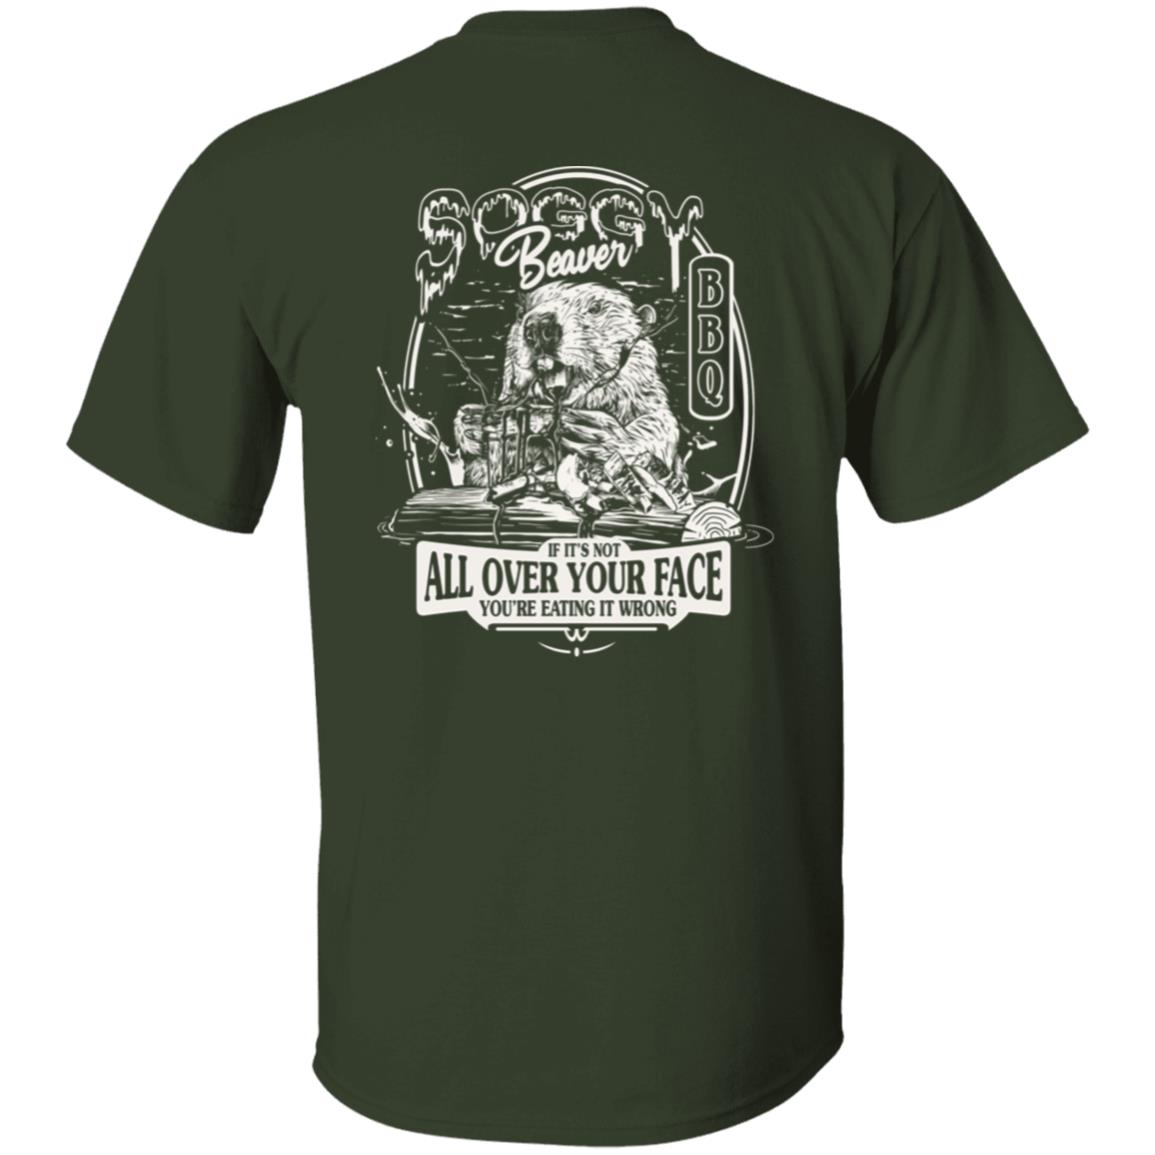 Soggy Beaver BBQ Cotton Tee (BACK PRINT) – The Dude's Threads